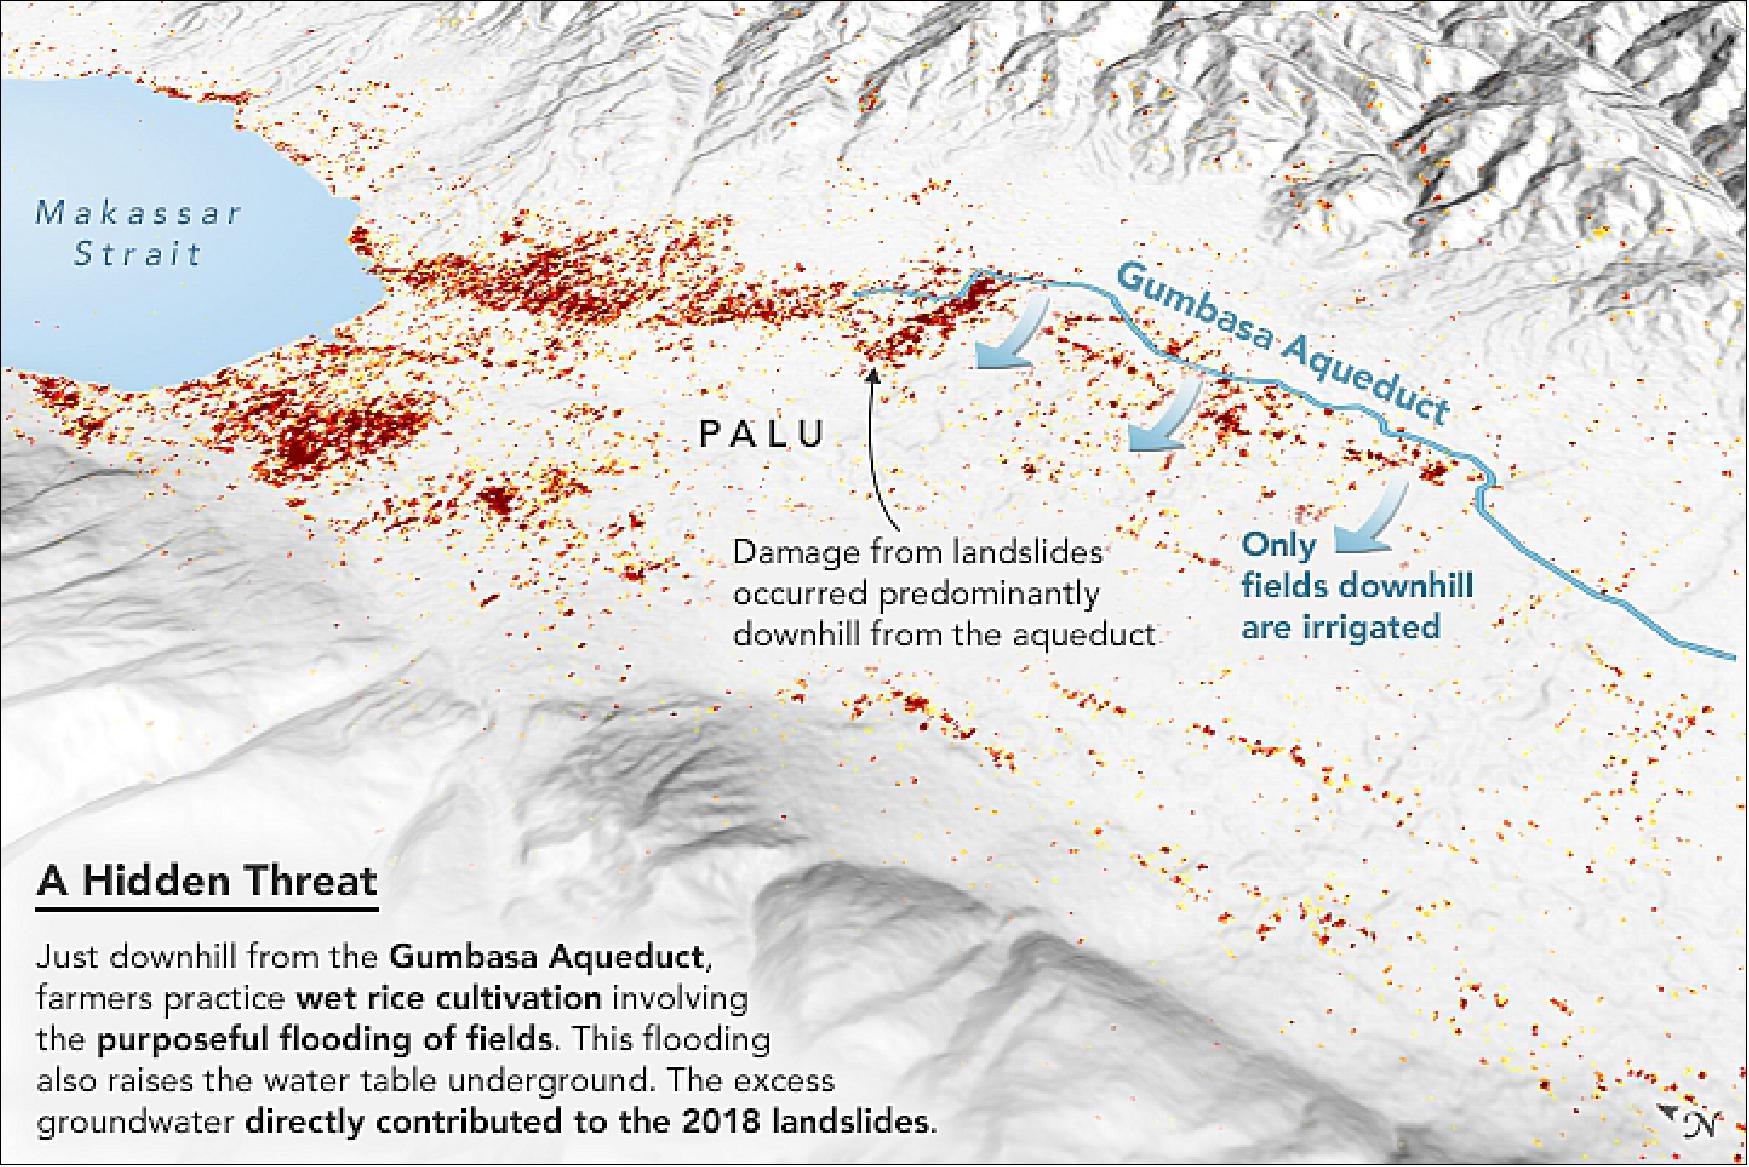 Figure 18: An earthquake in Indonesia made the land flow like mud in a place where science previously said it shouldn't. This image of PALSAR-2 on ALOS-2 is a damage proxy map created by Yun and colleagues at NASA/JPL. They examined satellite radar data collected before and after the quake, mapping changes in the land surface and built structures. Yun’s data has been overlaid on a digital elevation map to show the slope of the landscape (image credit: NASA Earth Observatory, image by Joshua Stevens, using data courtesy of Bradley, K. et al. (2019) and topographic data from the Shuttle Radar Topography Mission (SRTM). Story by Michael Carlowicz, with reporting from Esprit Smith and Carol Rasmussen, NASA Jet Propulsion Laboratory, and Shireen Federico, Nanyang Technological University)